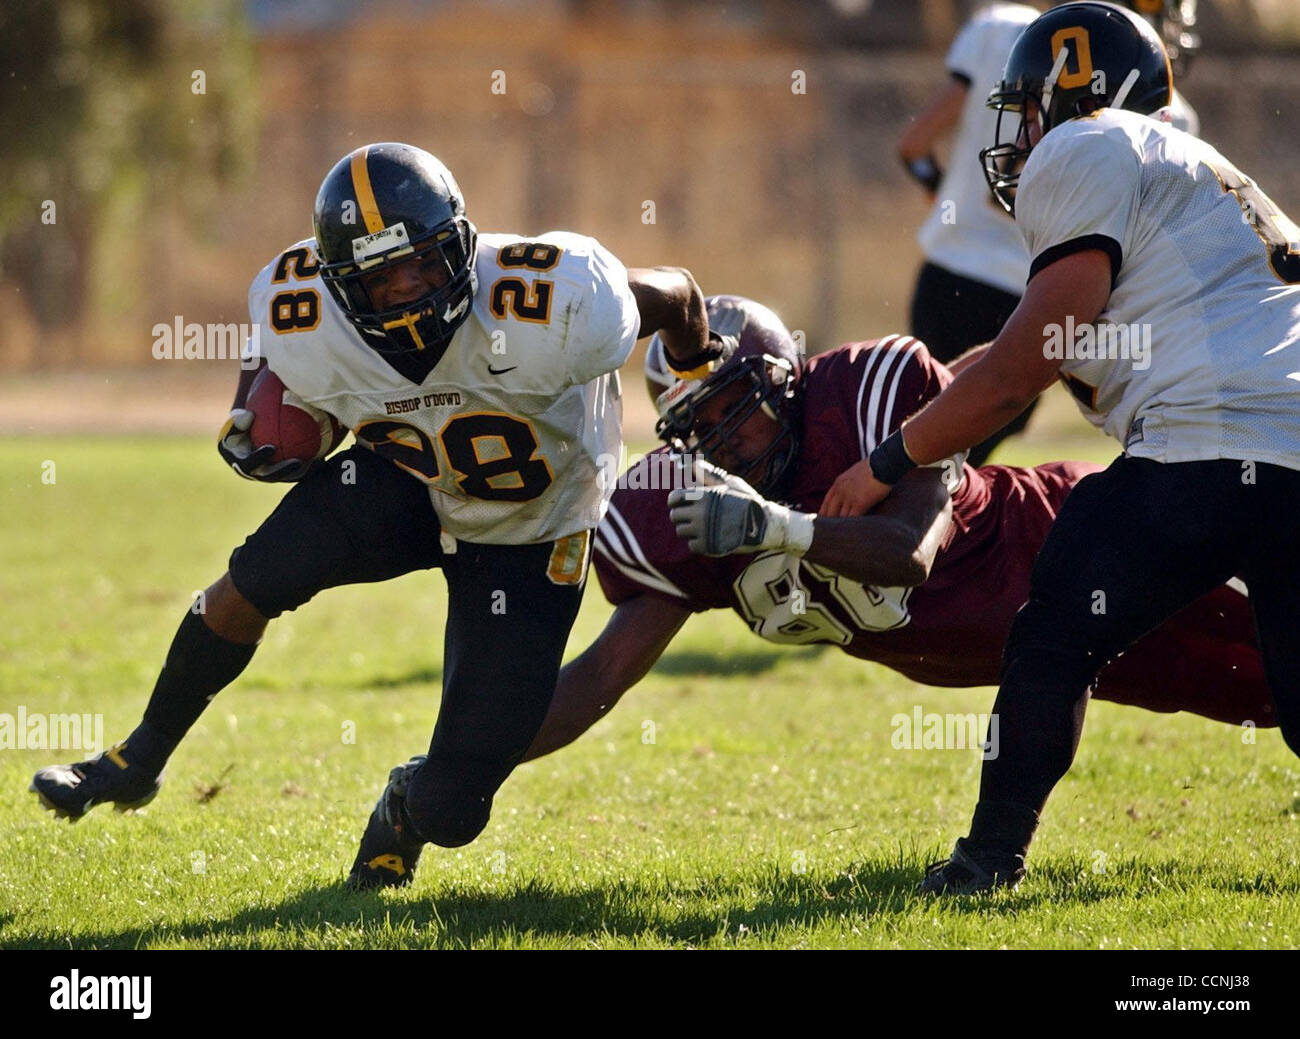 Bishop O'Dowd's Louis Arnold, Jr. (28) escapes San Lorenzo's Ratu Rabelo's (88) tackle in the first quarter of Friday's game, Oct. 8, 2004 in San Lorenzo, Calif. The Dragons won 42-6. (Contra Costa Newspapers/Joanna Jhanda) Stock Photo